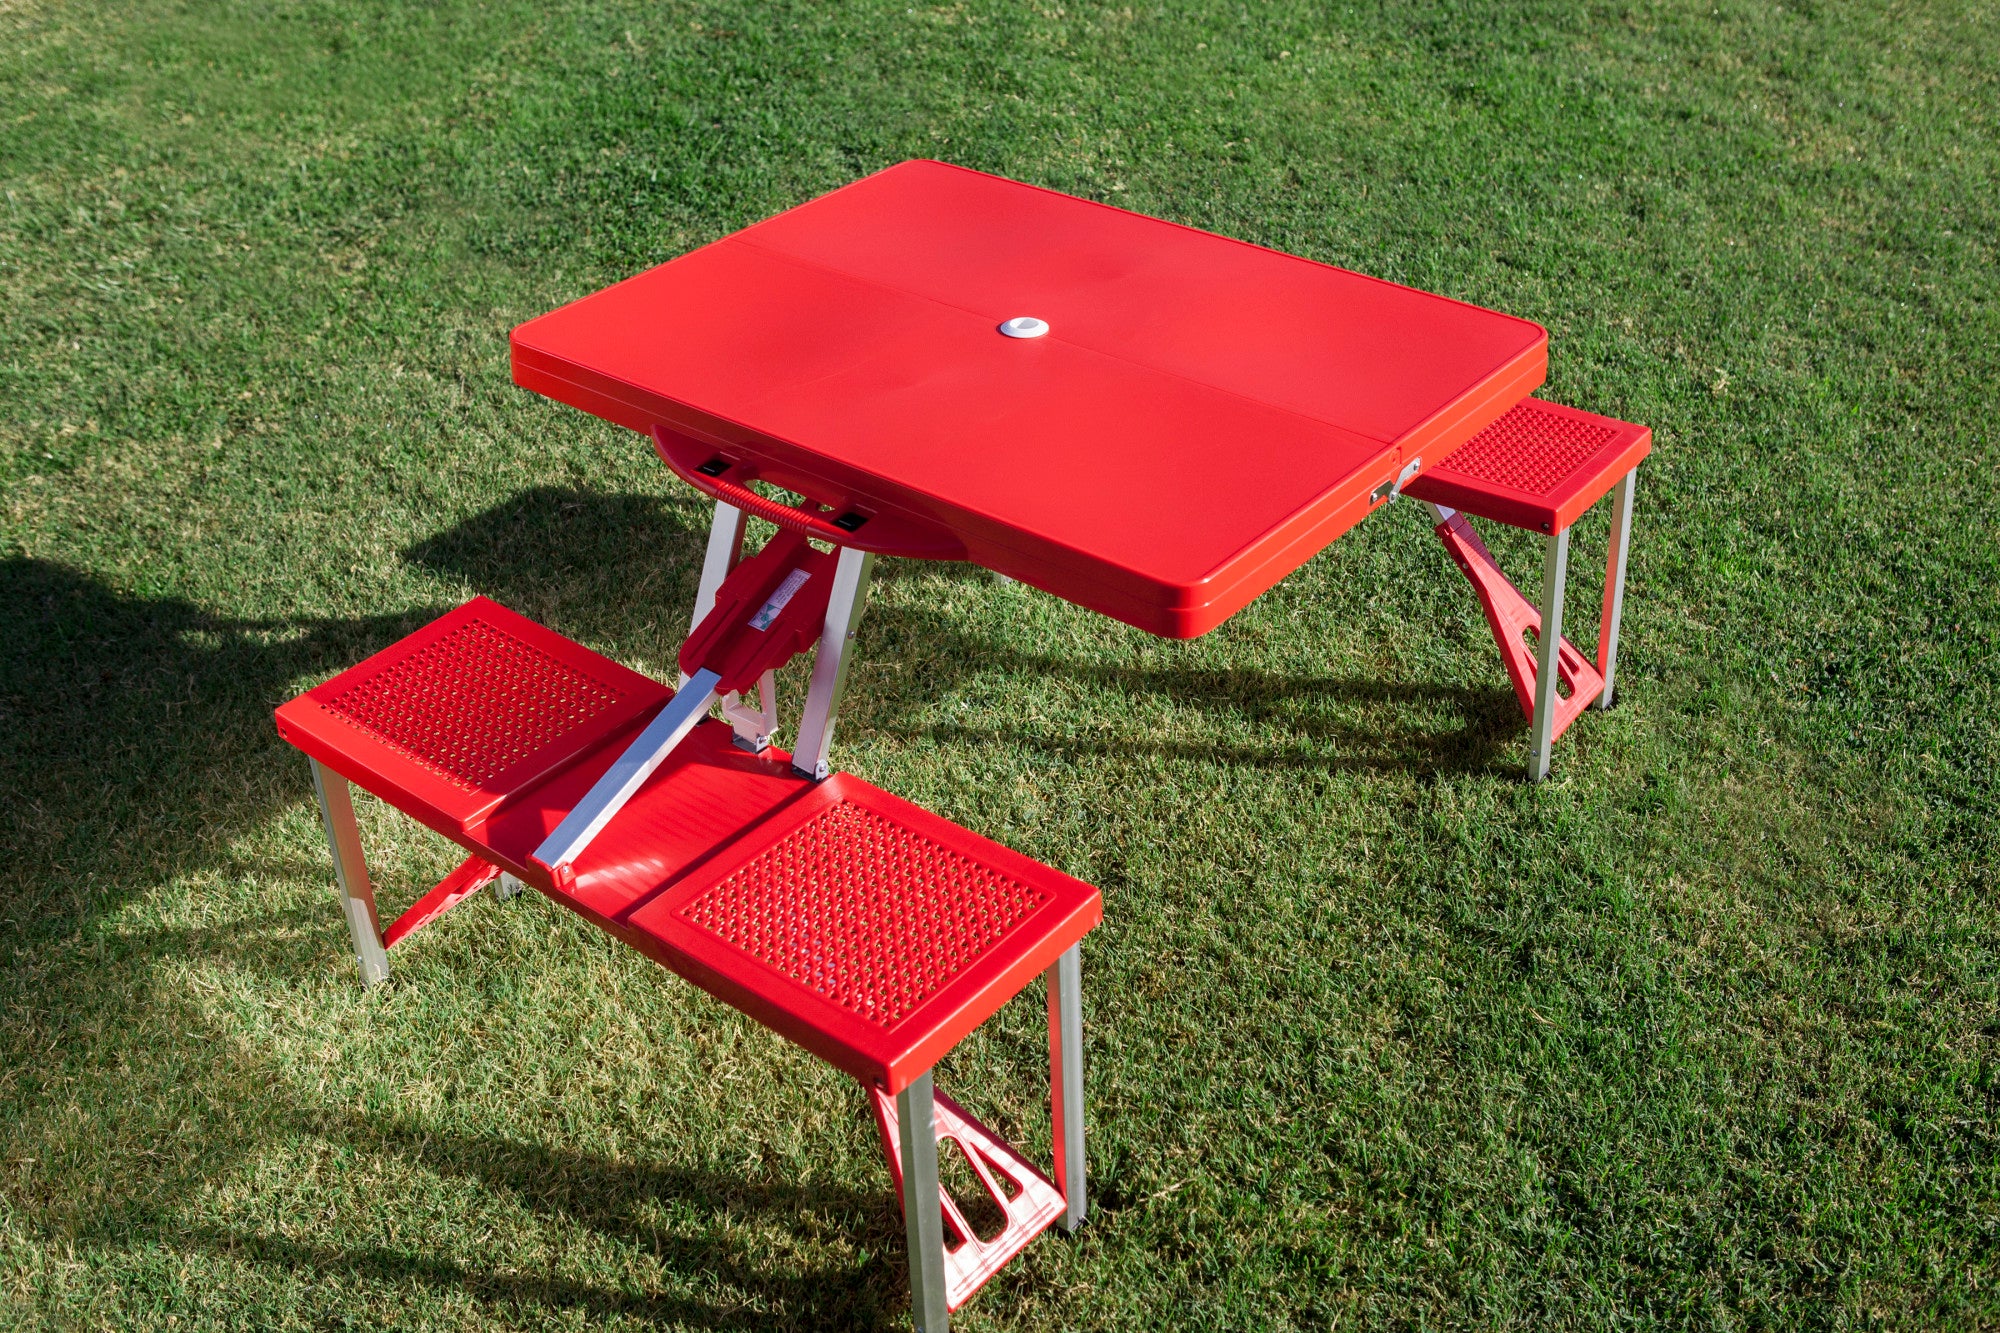 Ohio State Buckeyes - Picnic Table Portable Folding Table with Seats